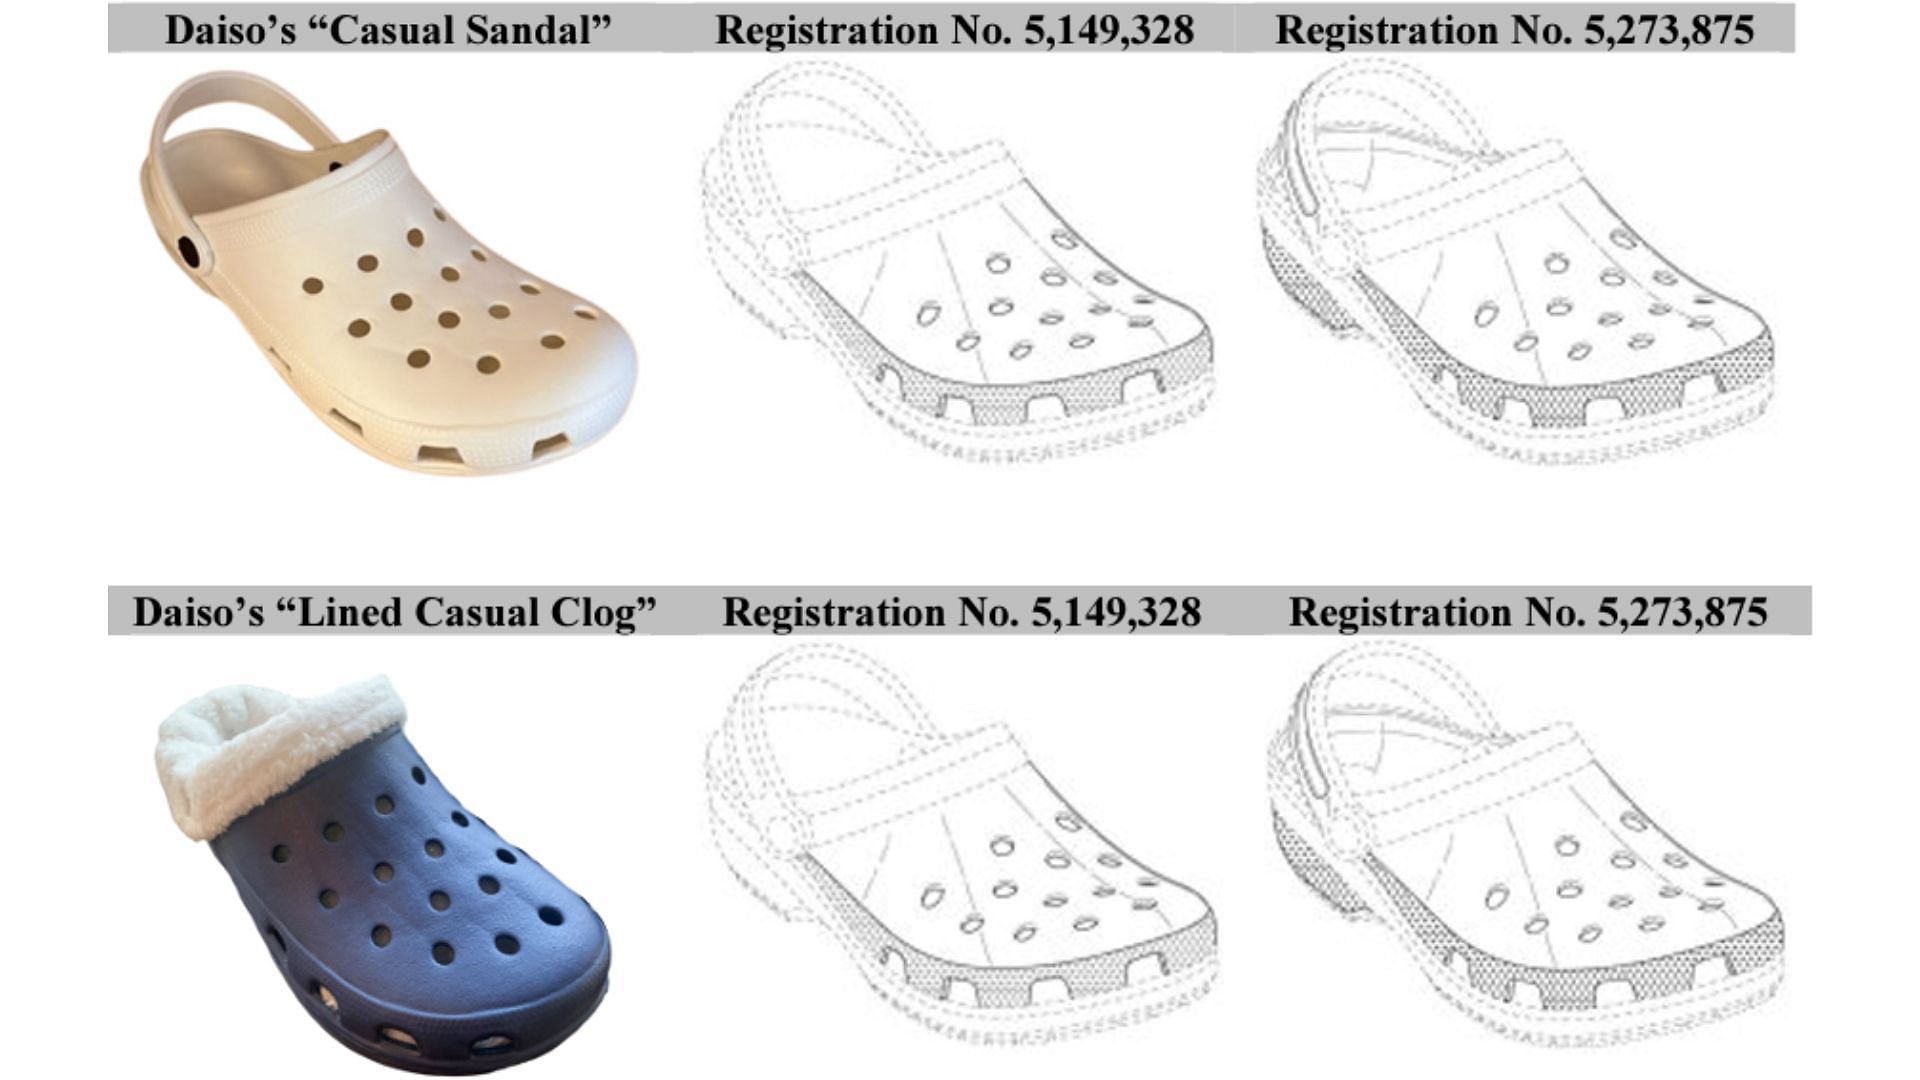 These Daiso clogs design are under dispute (Image via Twitter/@TAFLegal)